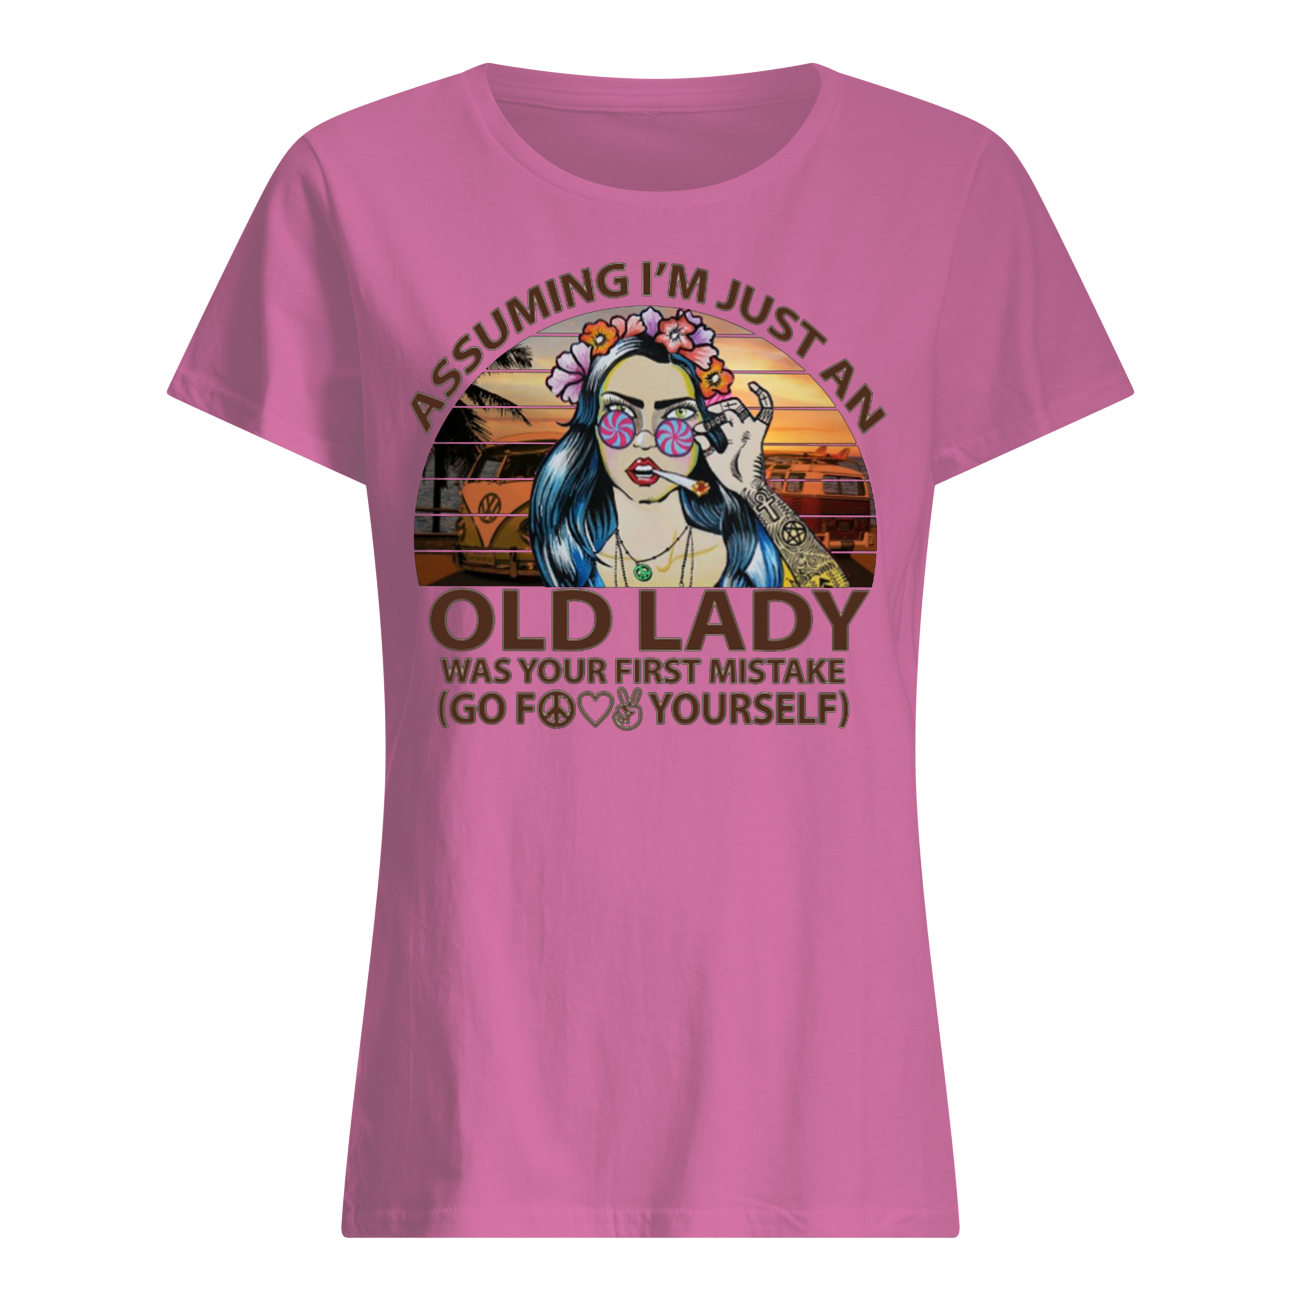 Hippie girl assuming I'm just an old lady was your first mistake vintage women's shirt